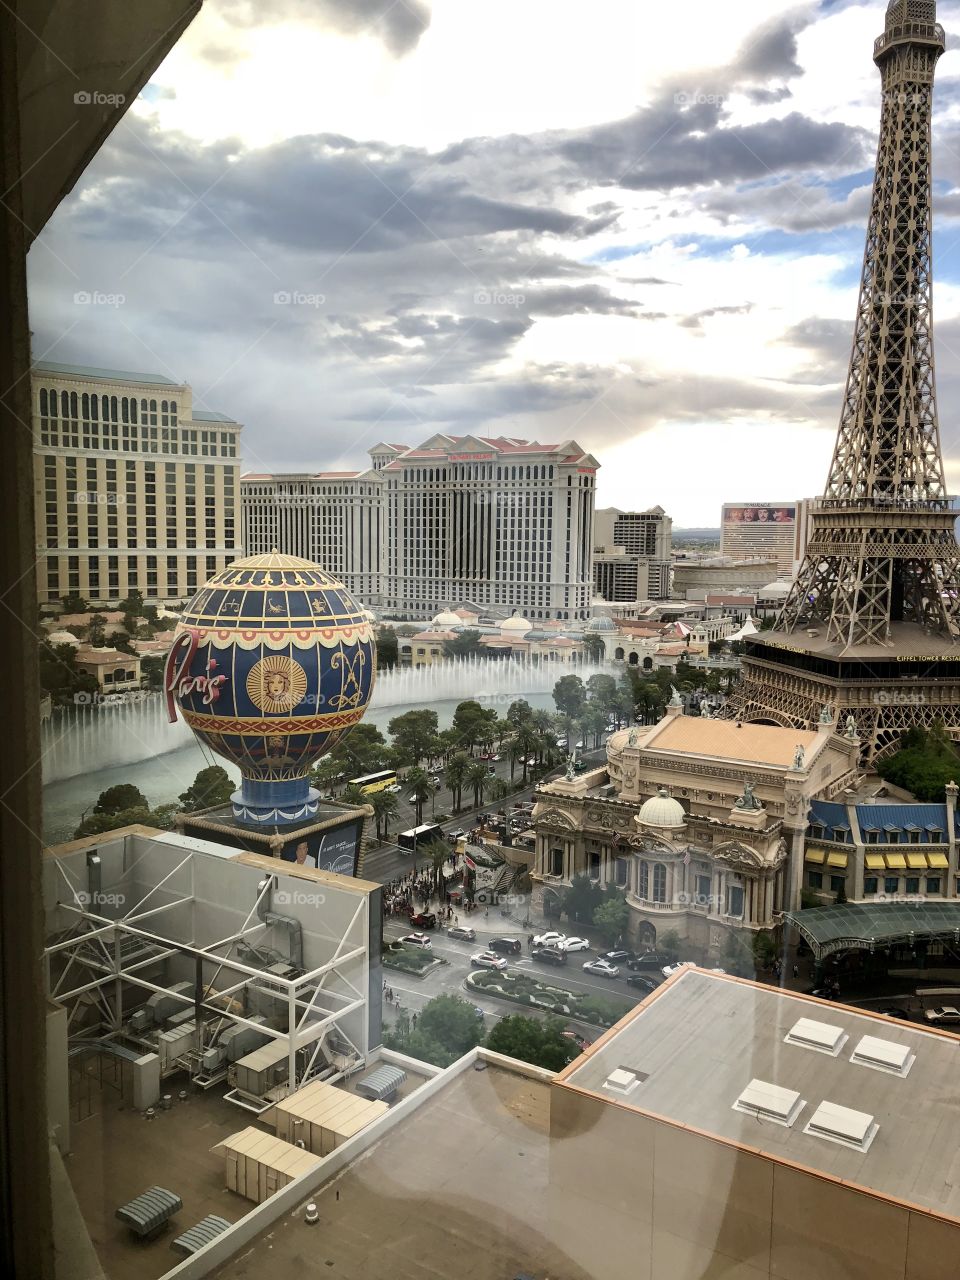 Las Vegas skyline including dancing waters at Bellagio from Planet Hollywood Hotel windows.